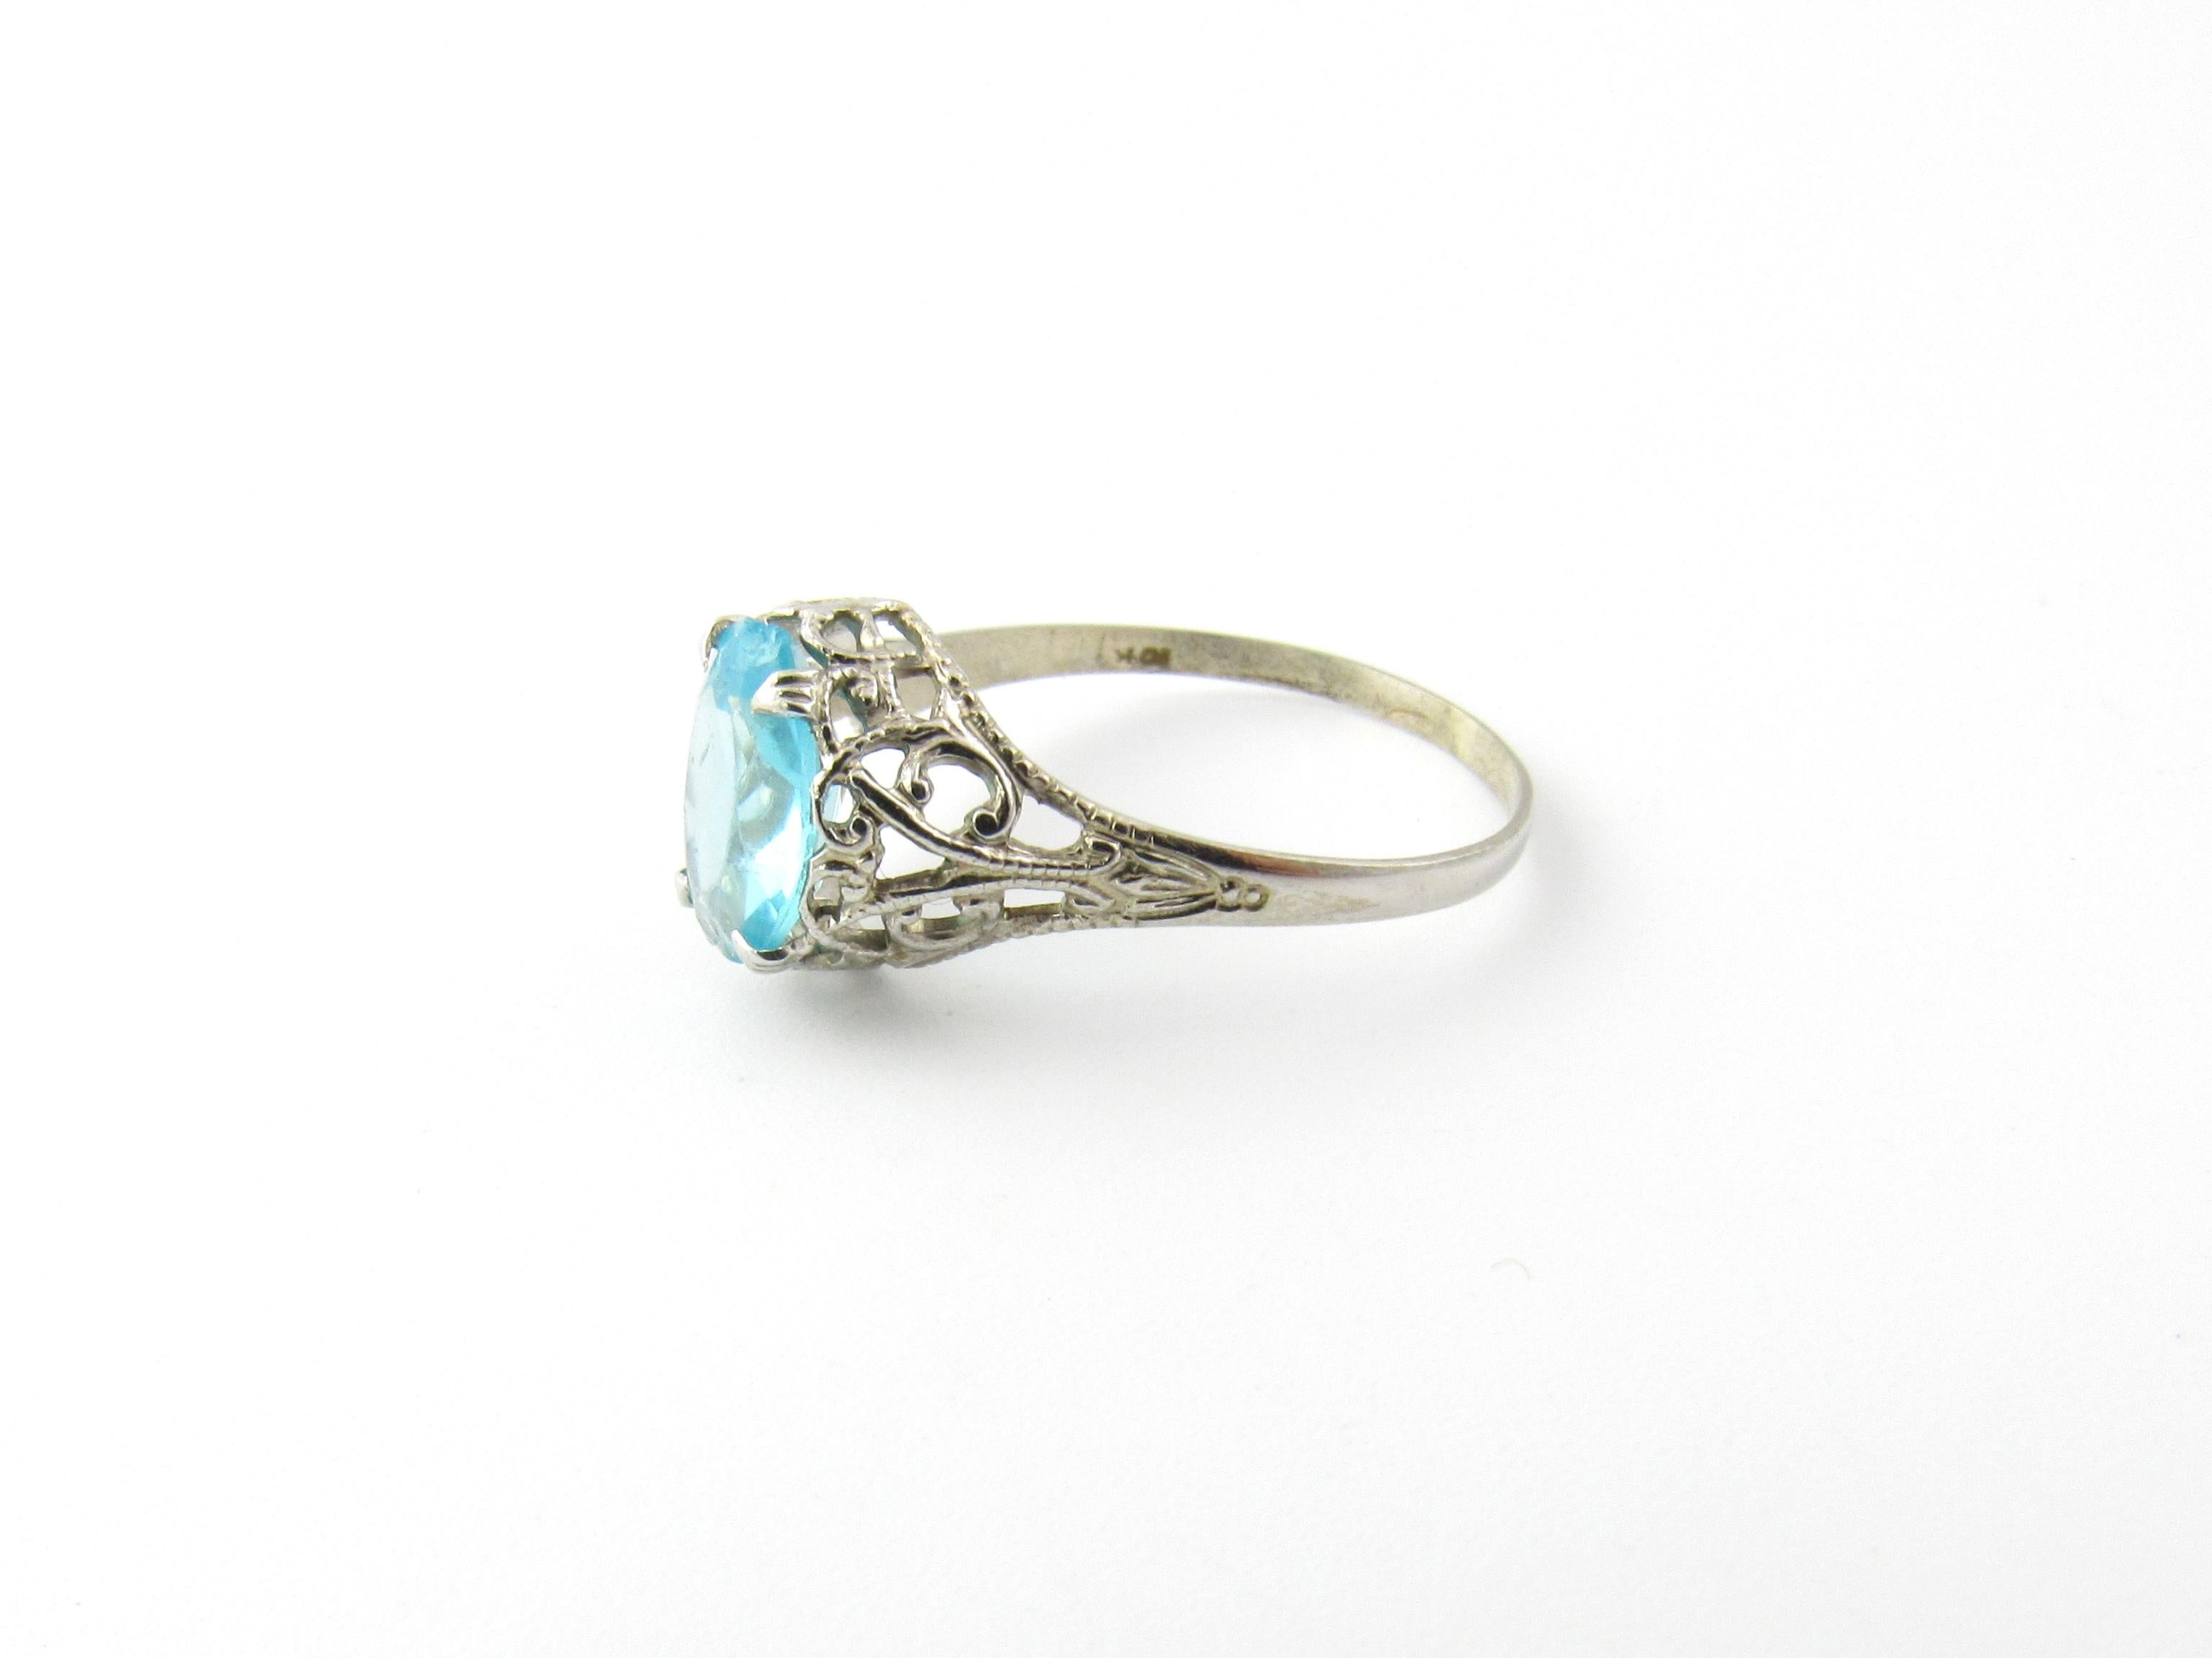 Vintage 10 Karat White Gold Blue Topaz Ring Size 7.5

This stunning ring features one oval blue topaz (9 mm x 7 mm) set in beautifully detailed 10K white gold filigree. Shank measures 1.5 . Height measures 5 mm.

Ring Size: 7.5

Weight: 0.8 dwt. /